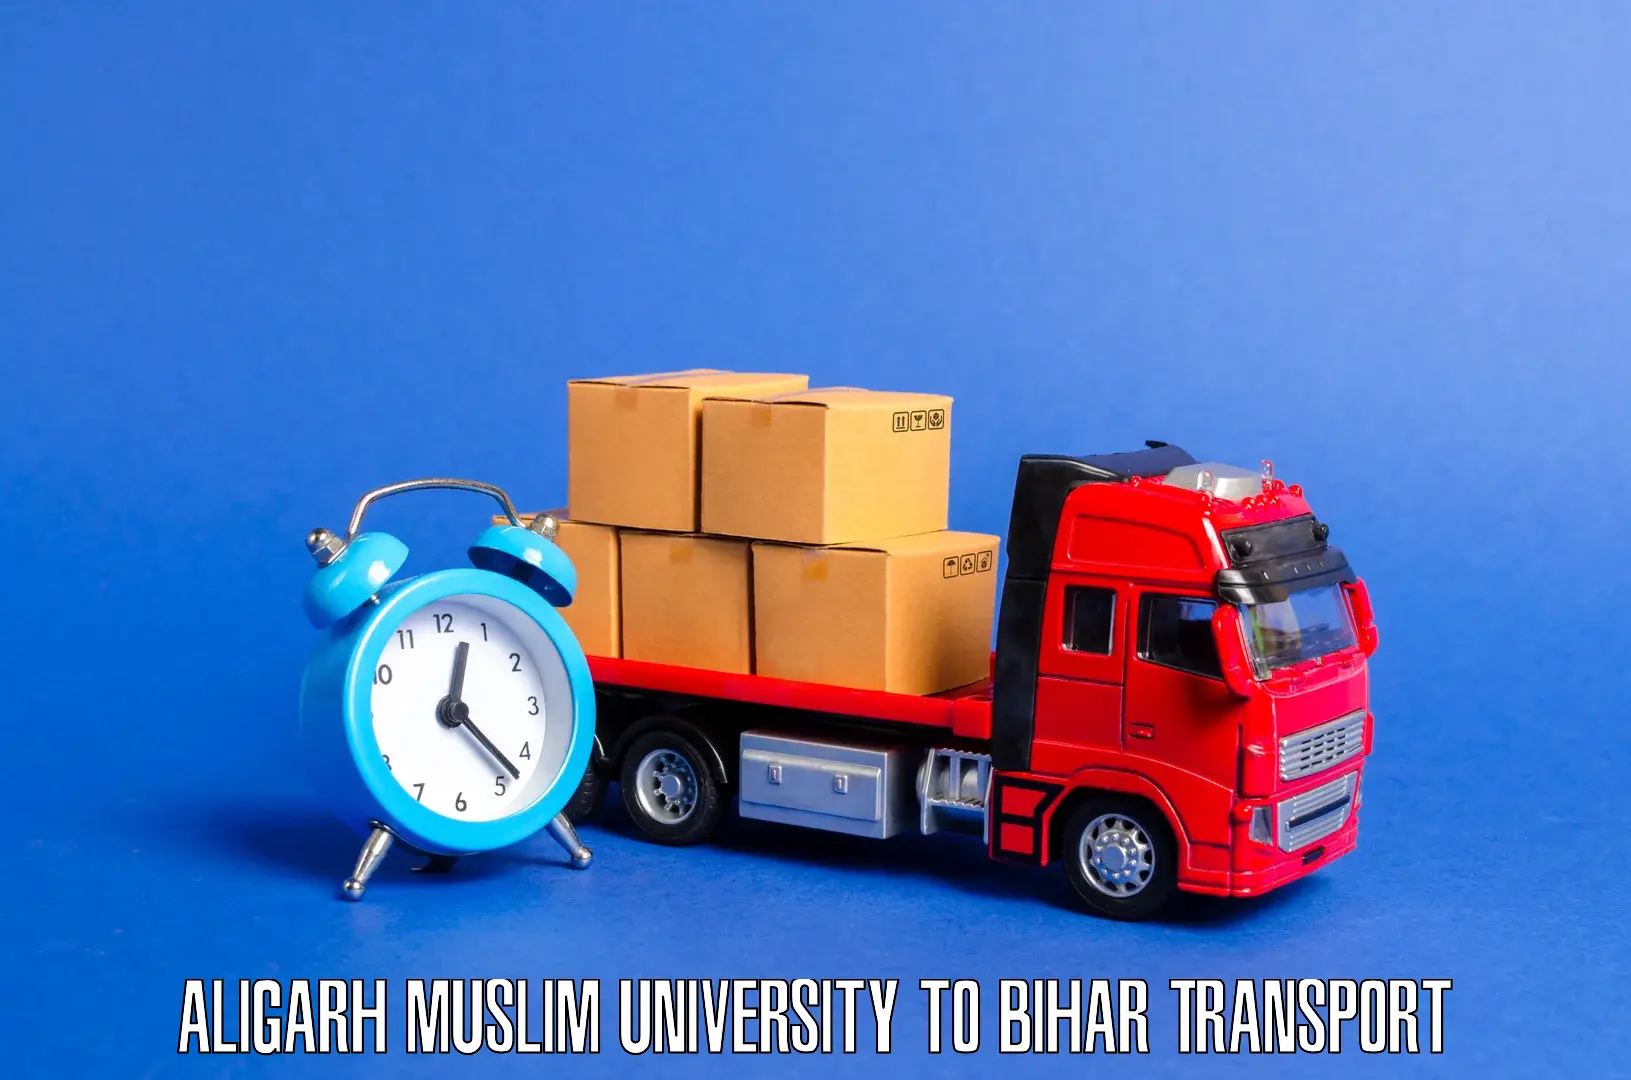 Transport bike from one state to another Aligarh Muslim University to Dinara